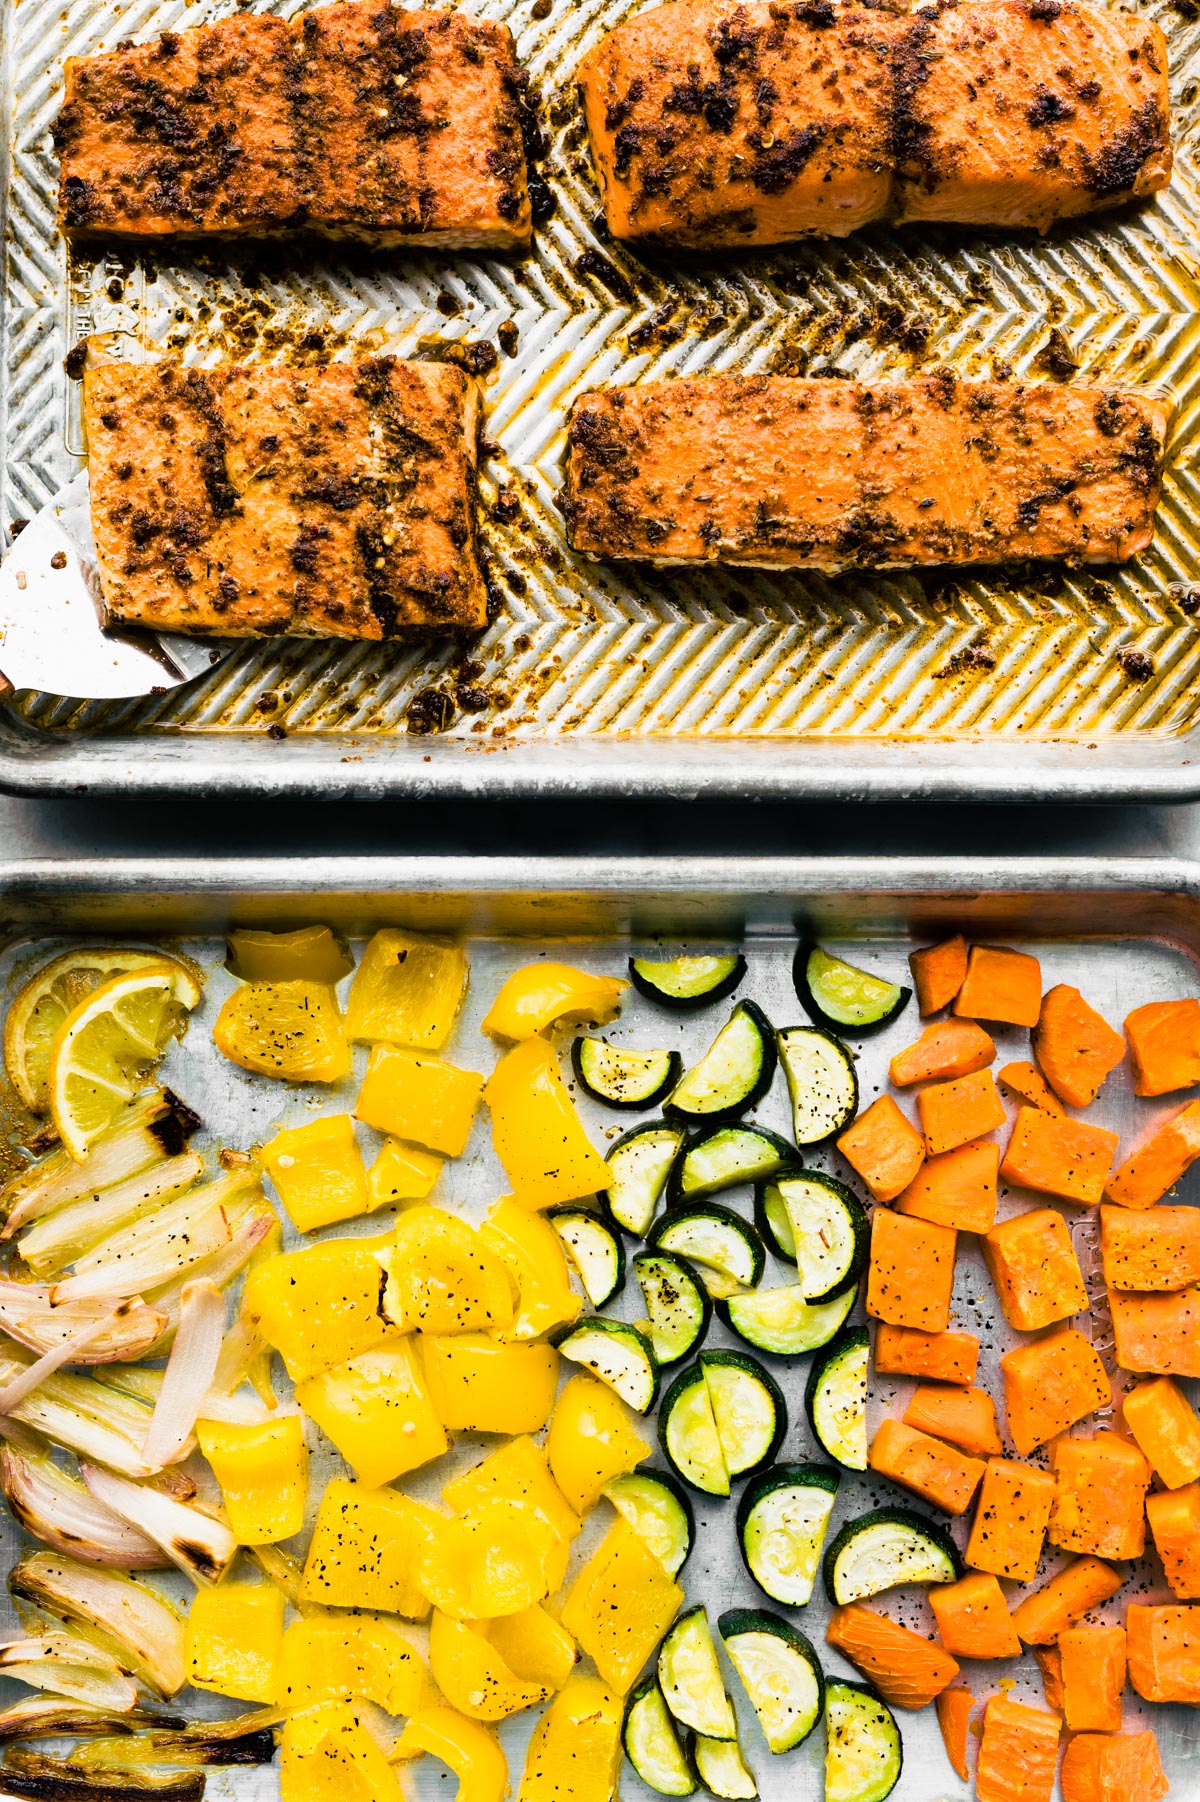 Two baking sheets, one with baked jerk salmon and one with roasted veggies.